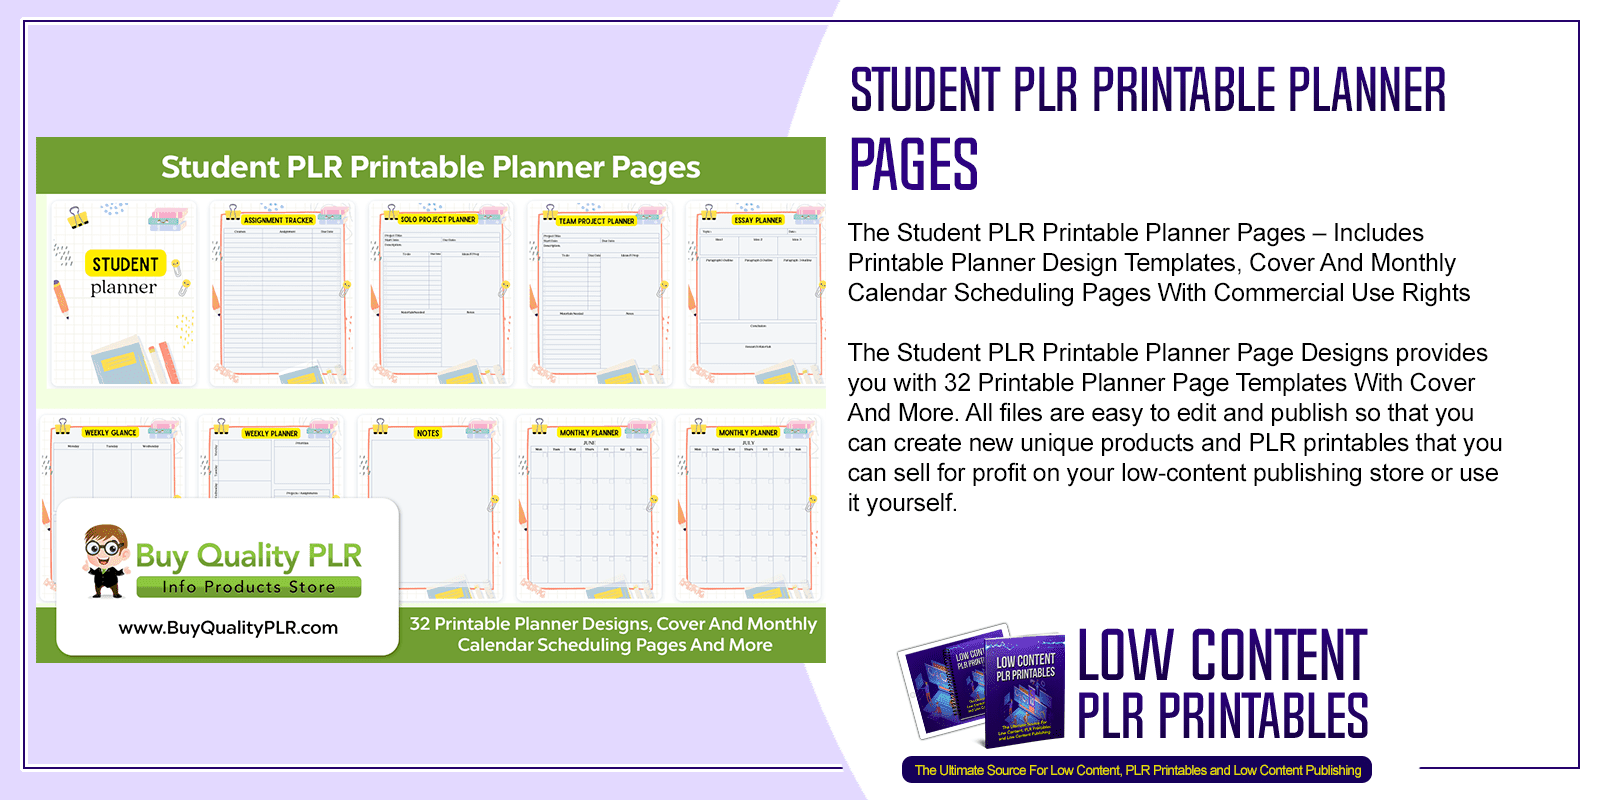 Student PLR Printable Planner Pages